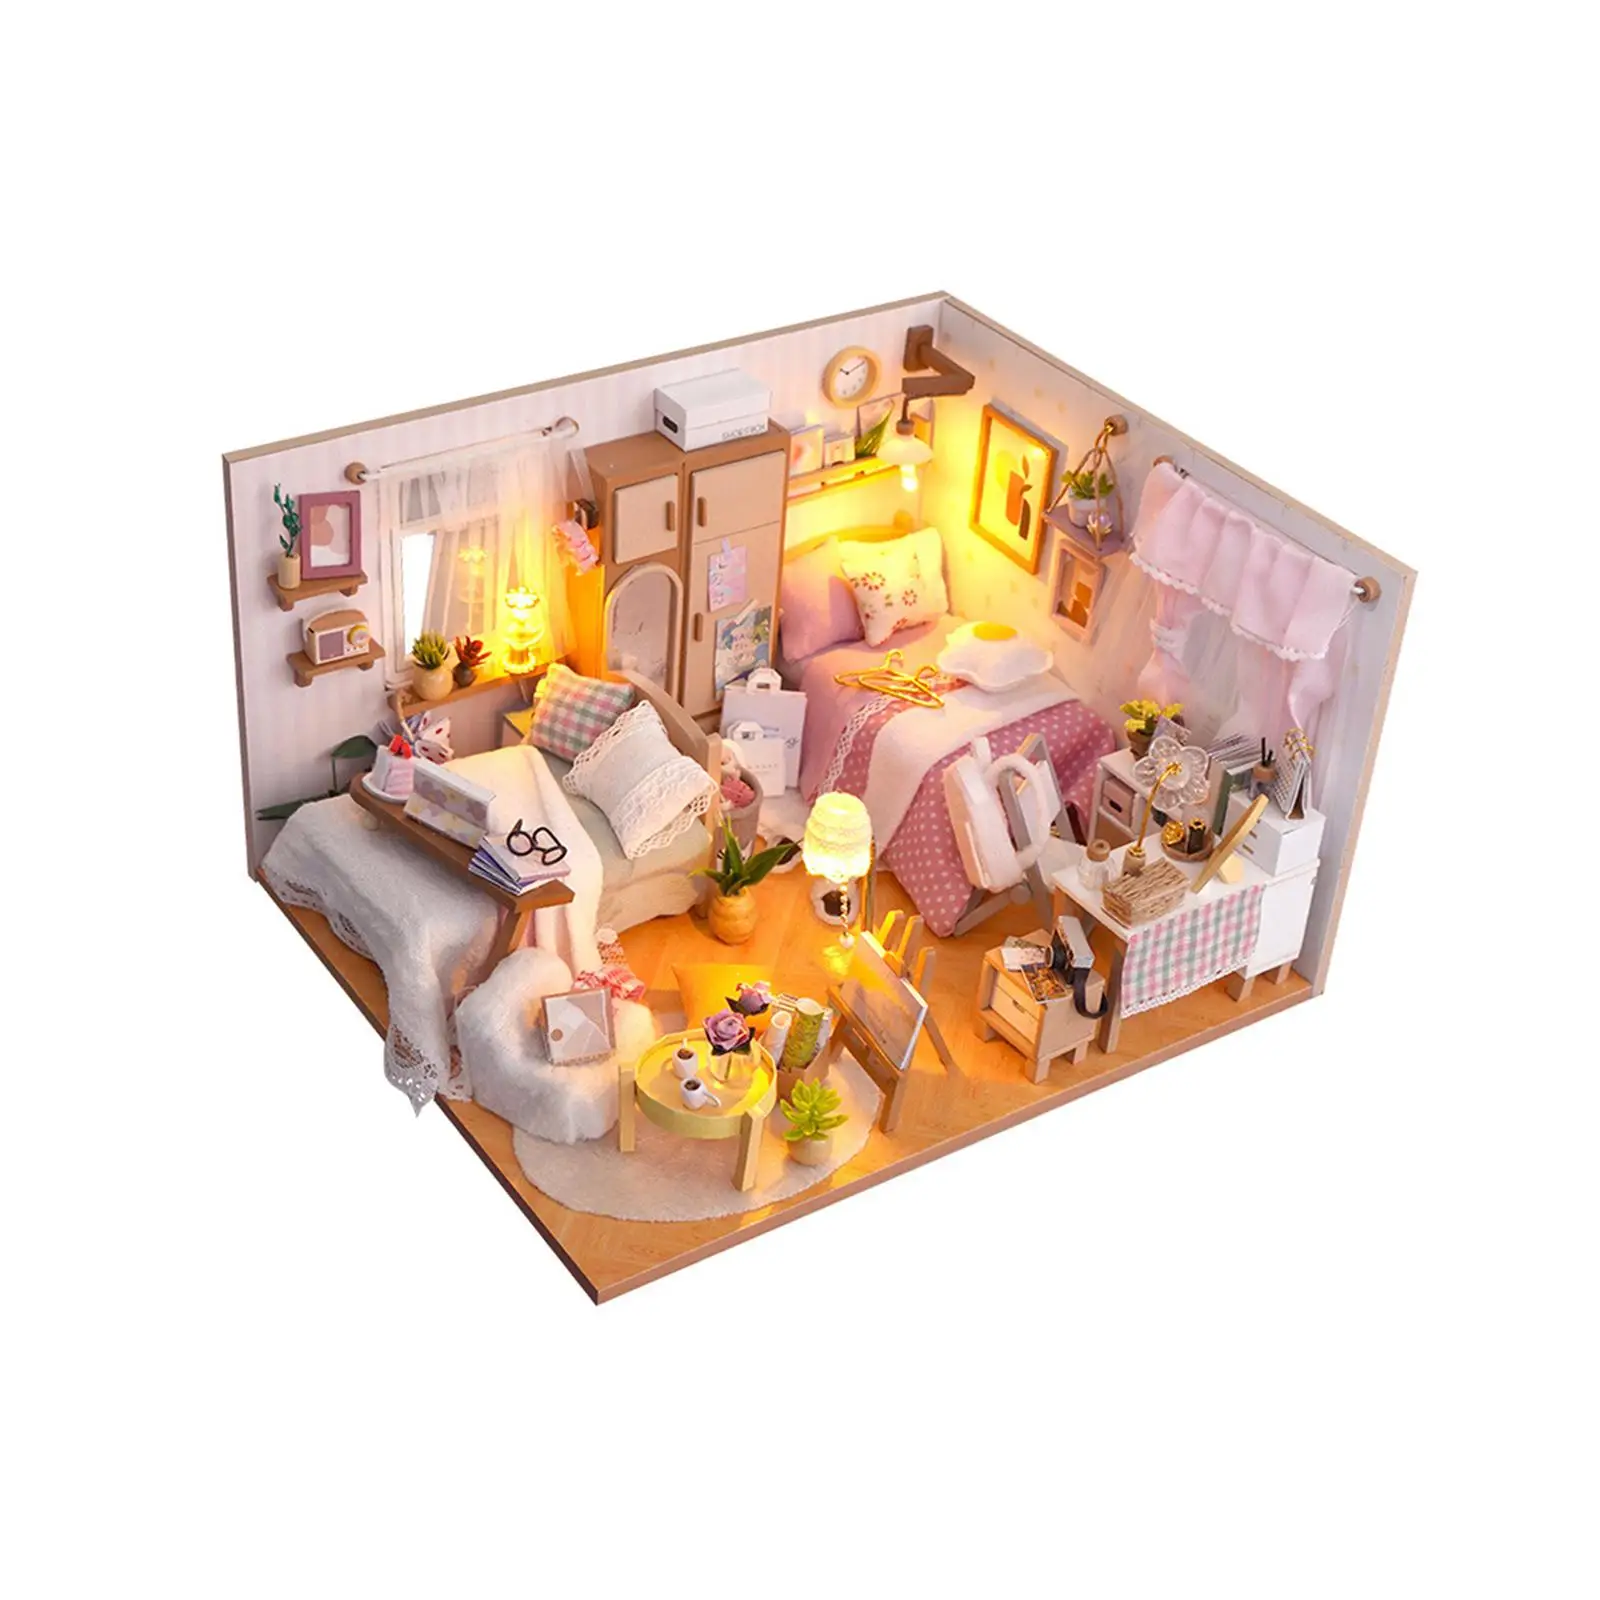 DIY Wooden Miniature Dollhouse Kits Modern Easy to Assemble Creative Bedroom